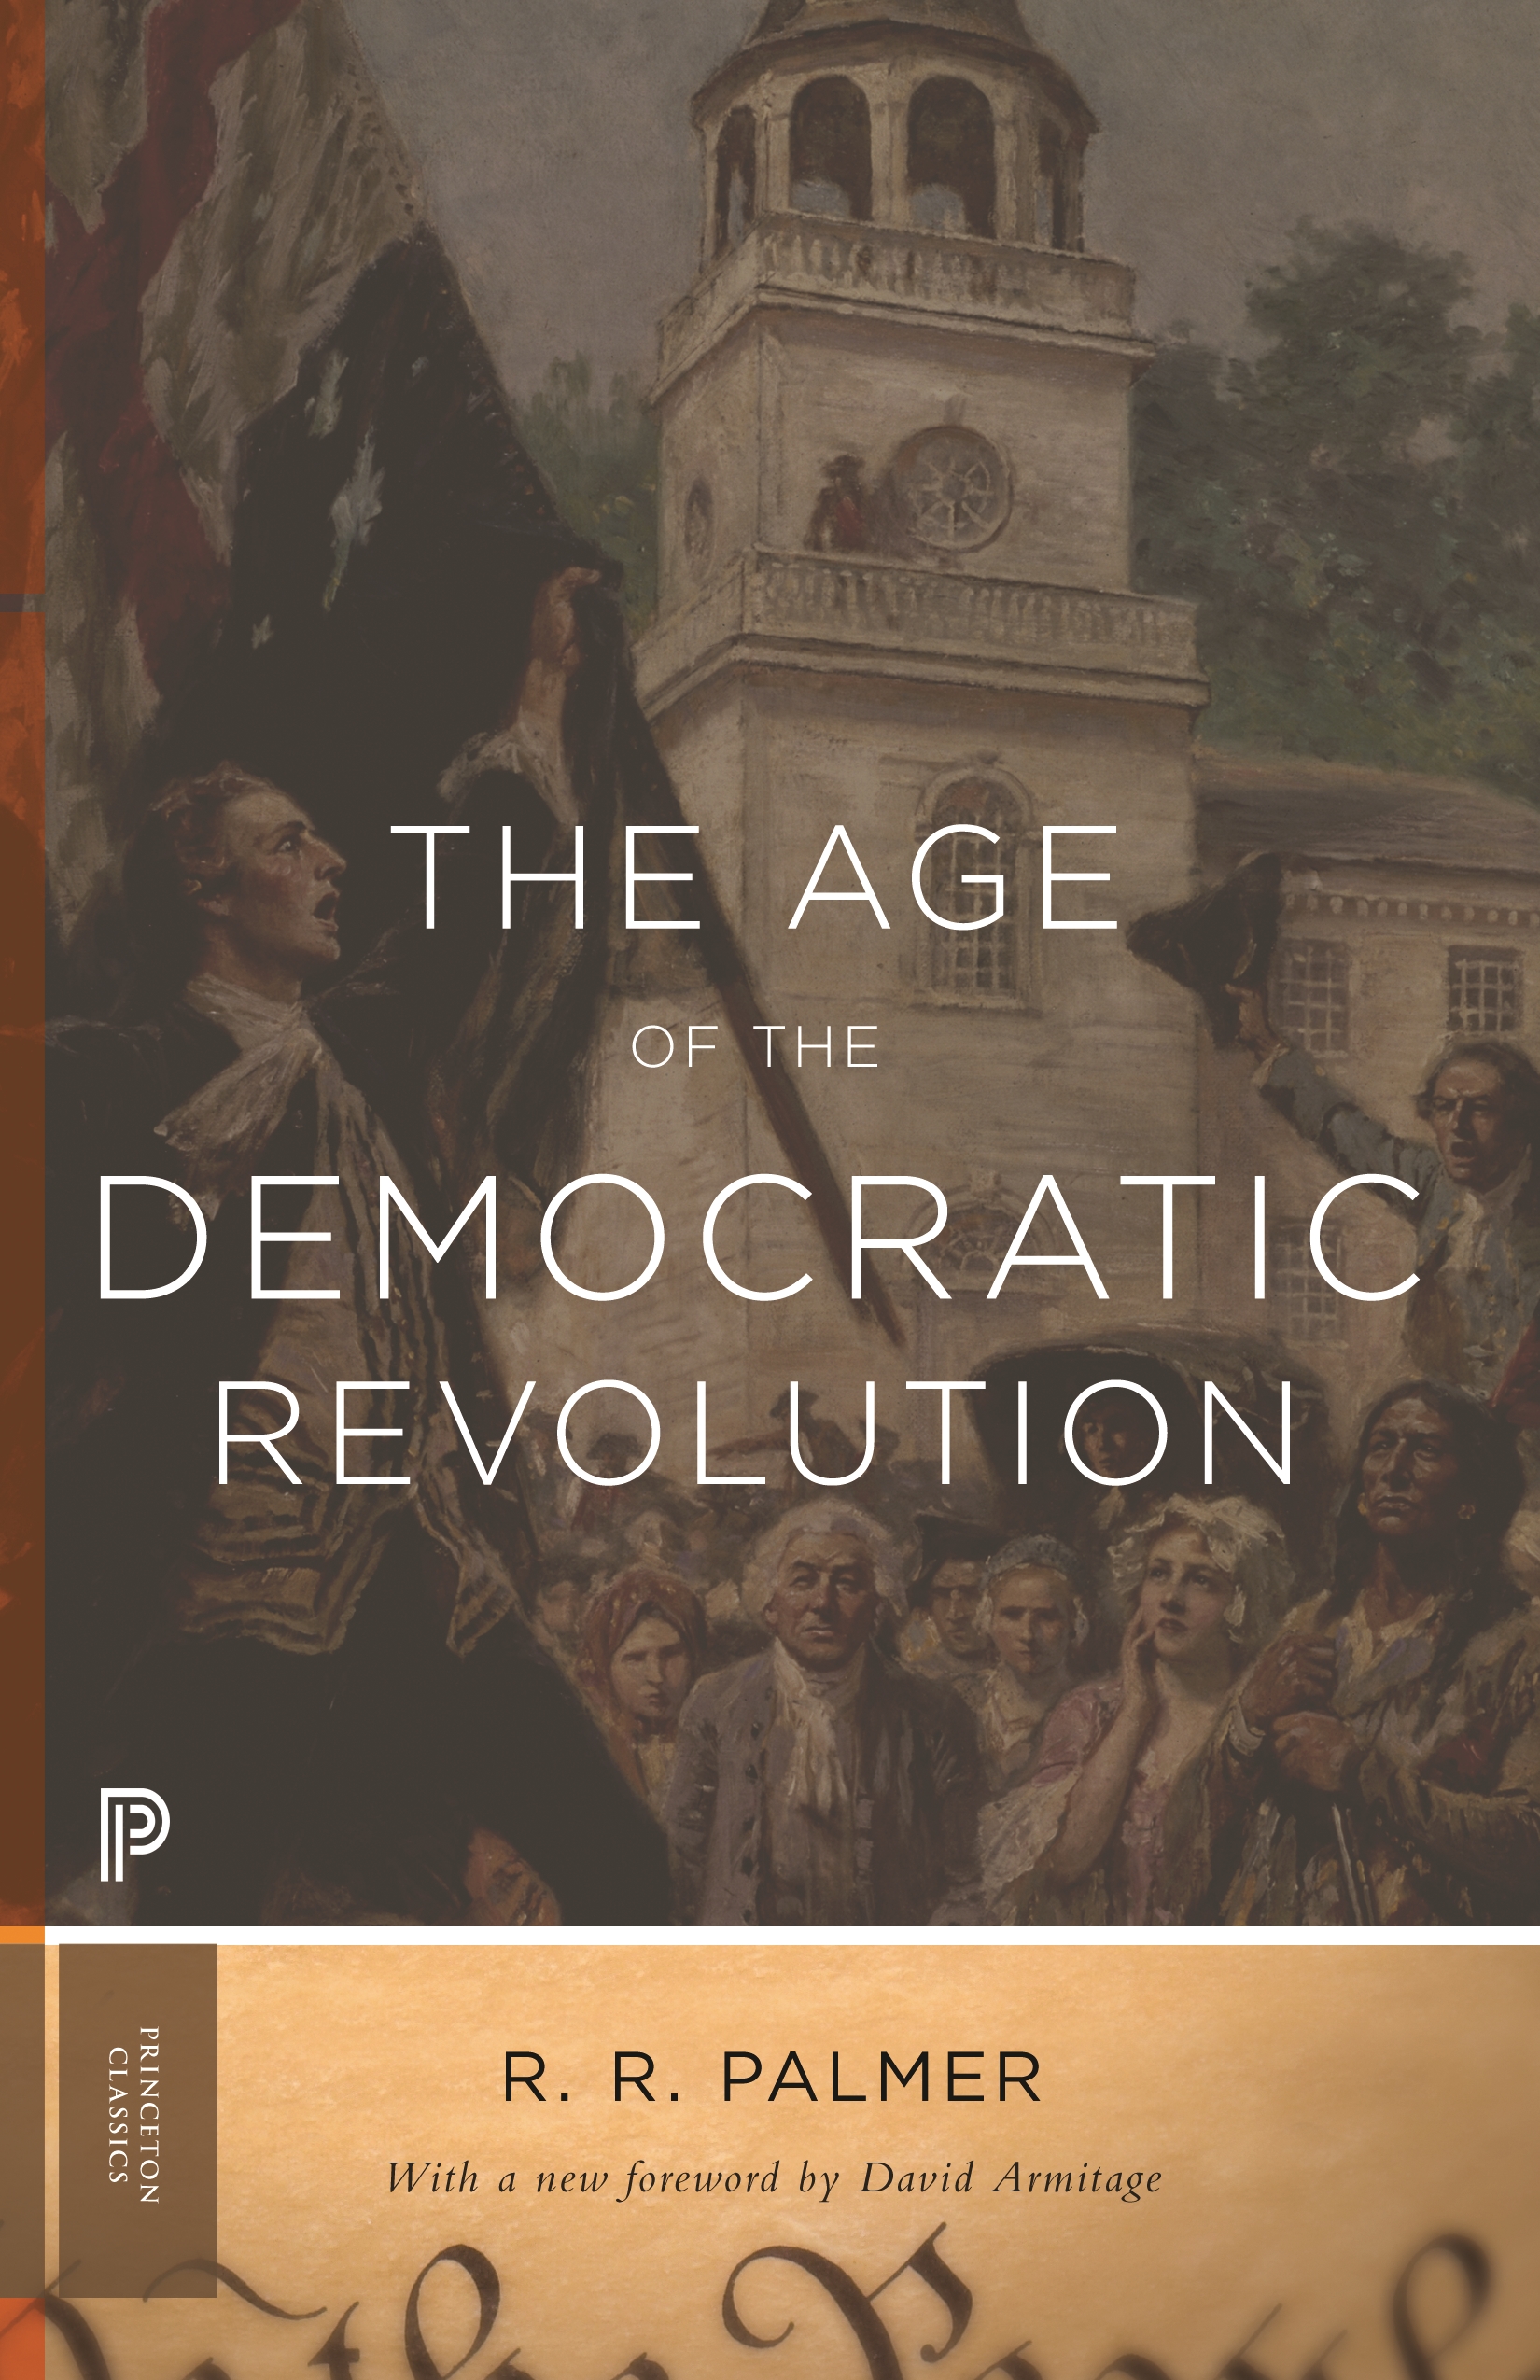 Updated Edition A Political History of Europe and America 1760-1800 The Age of the Democratic Revolution